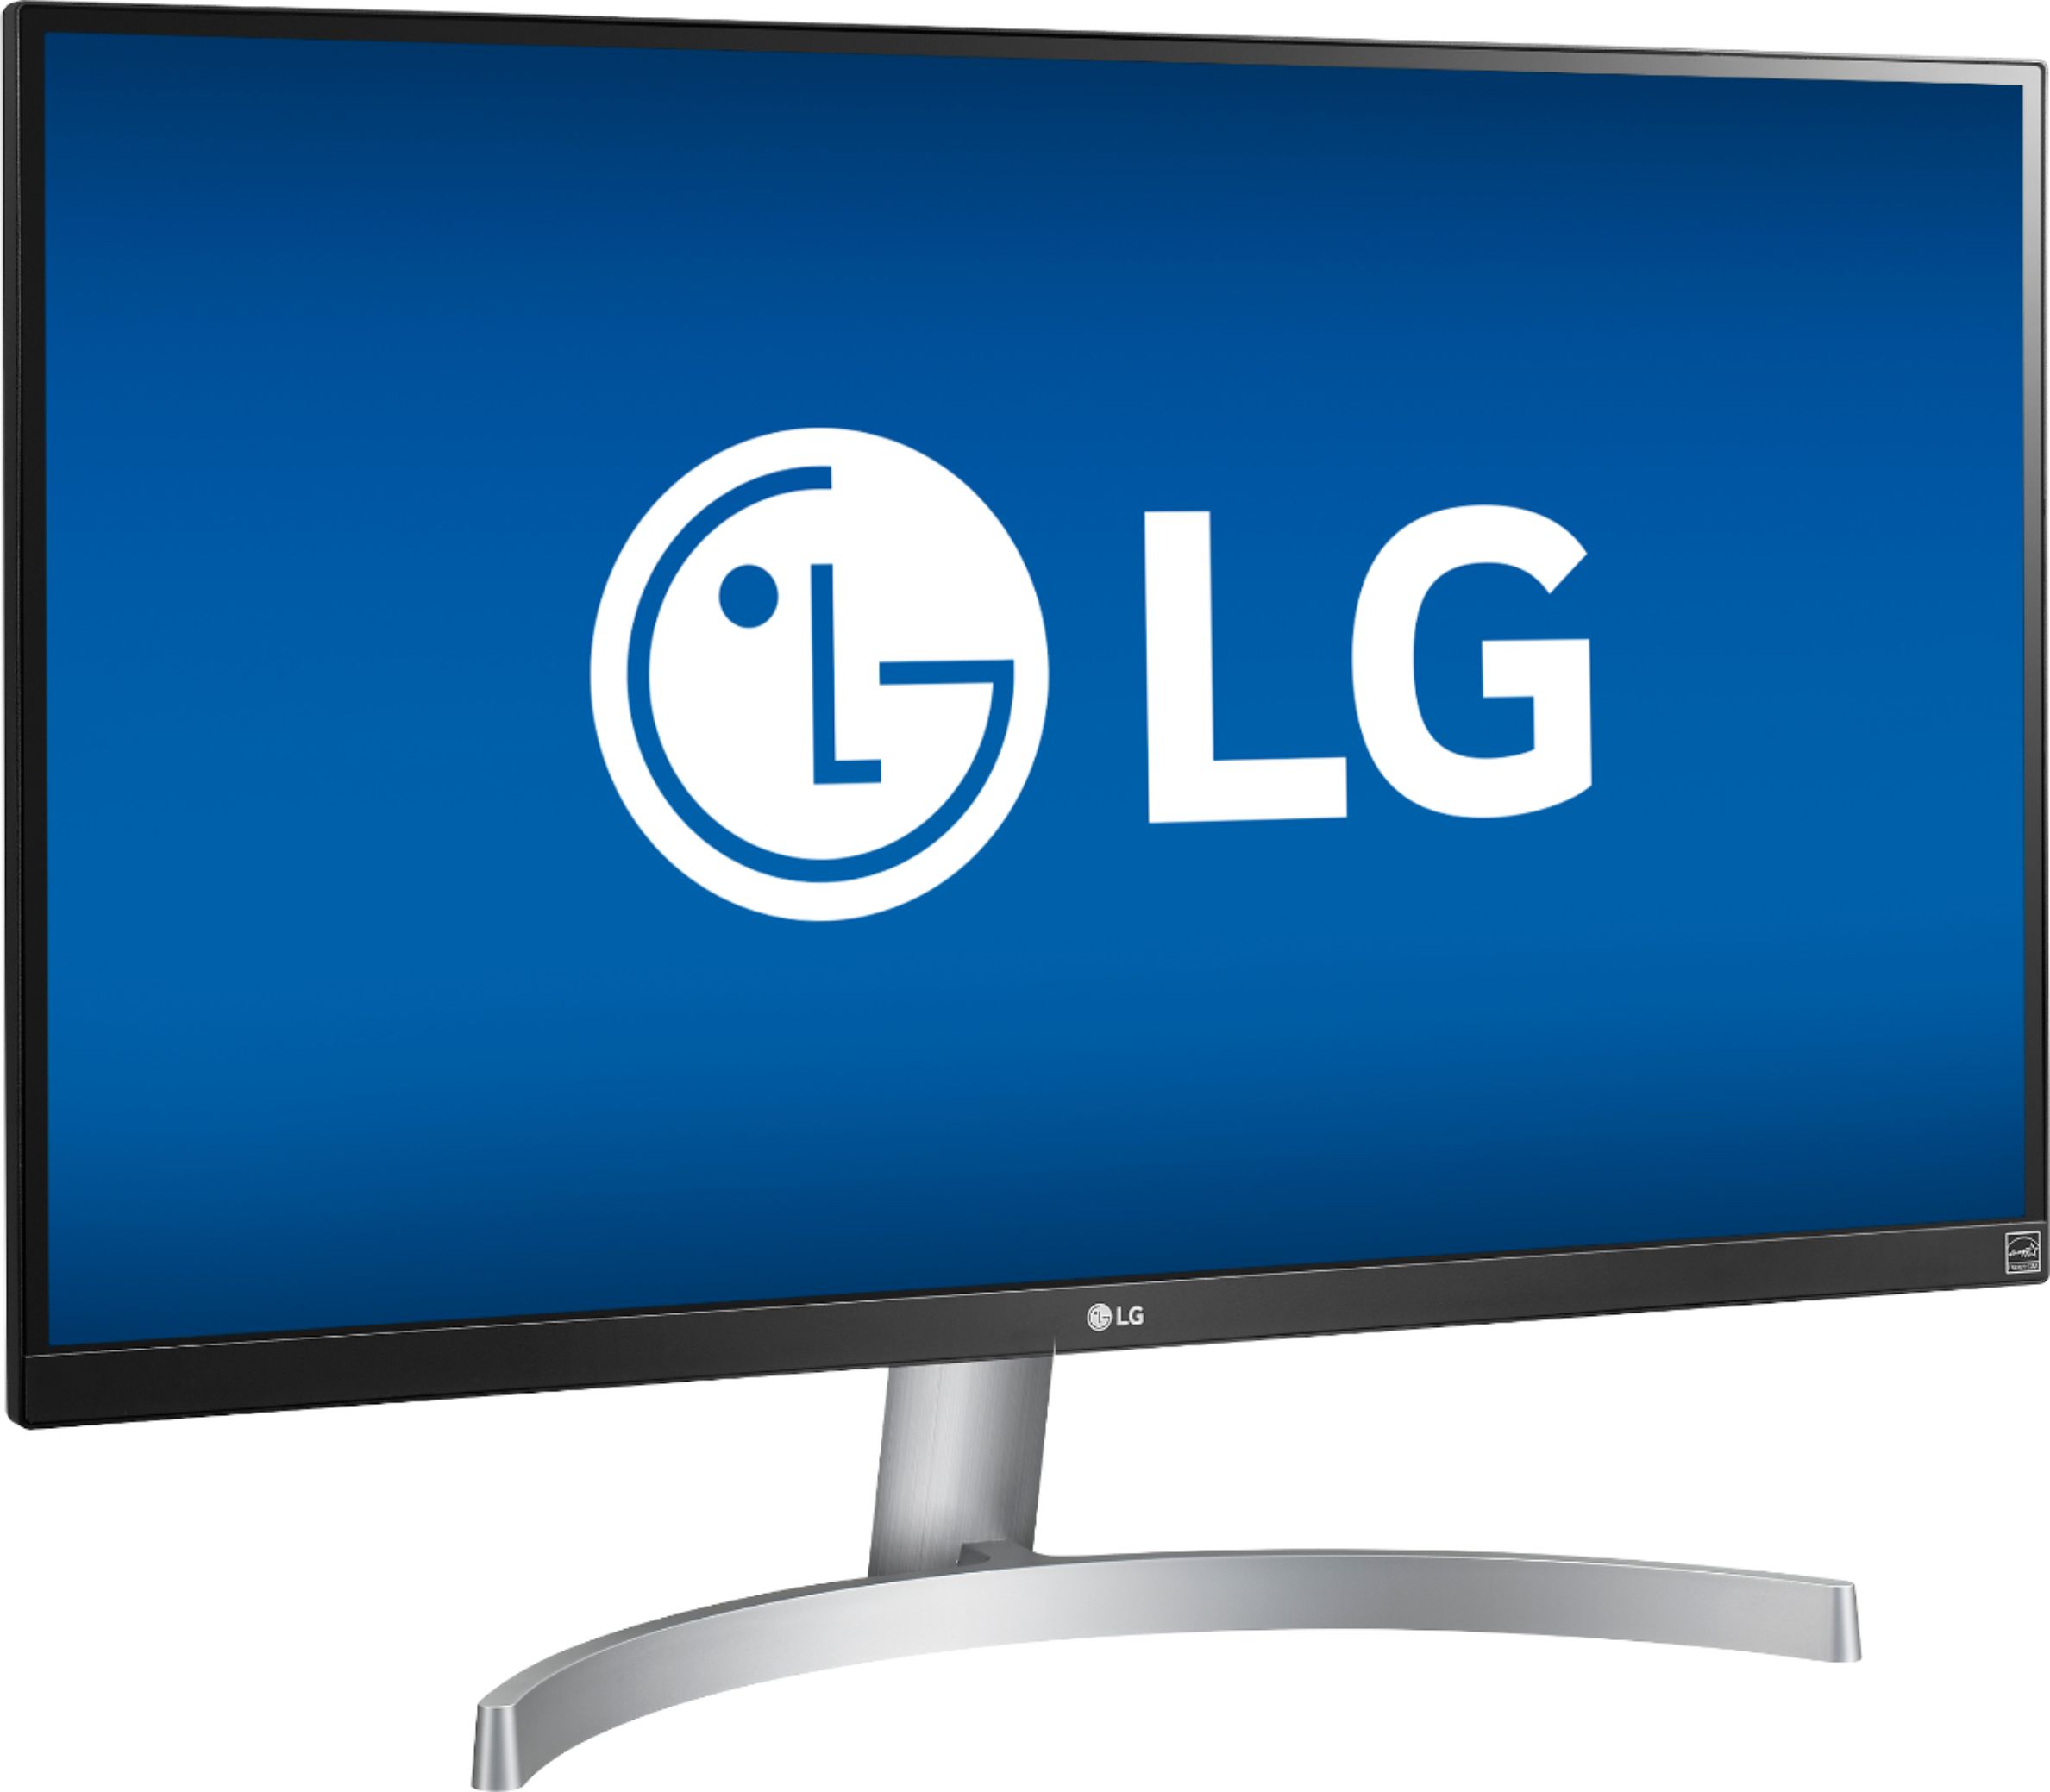 Angle View: LG - Geek Squad Certified Refurbished 27UL600-W 27" IPS LED 4K UHD FreeSync Monitor with HDR - Silver/White